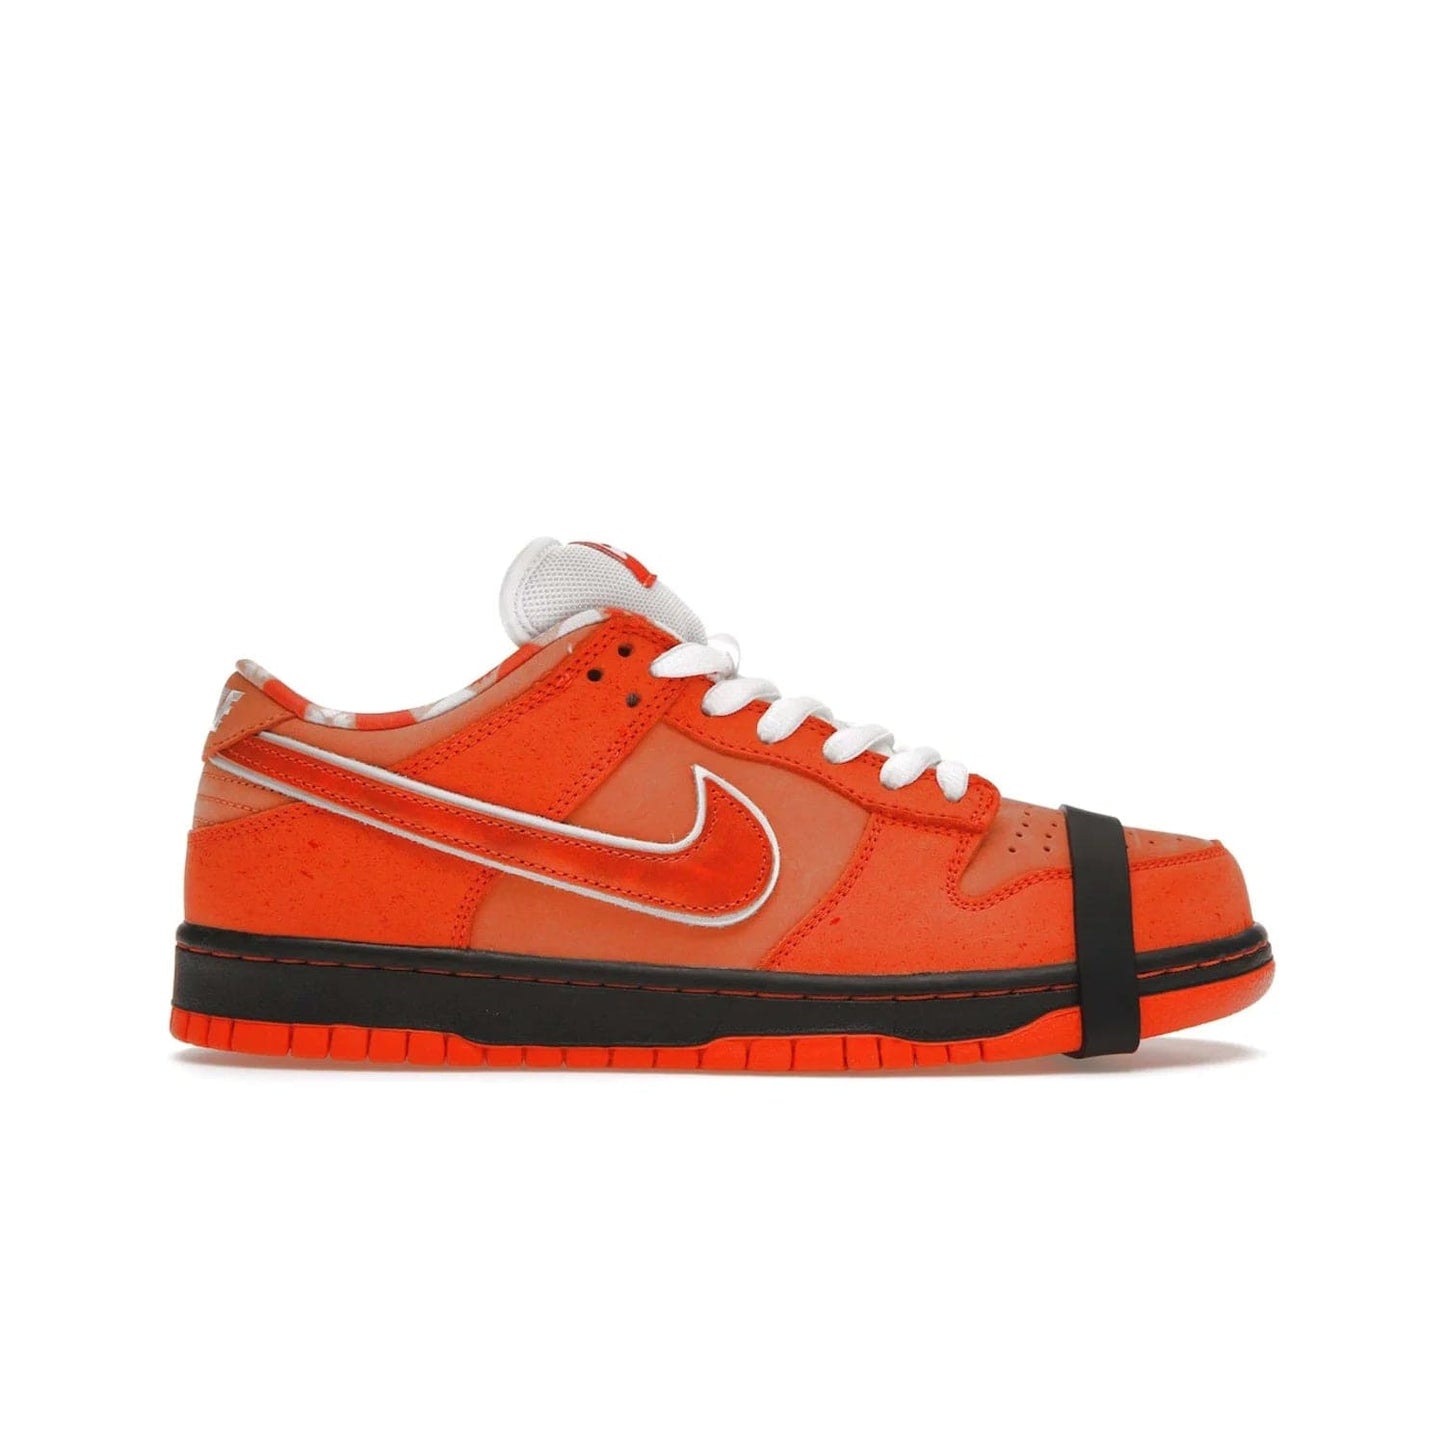 Nike SB Dunk Low Concepts Orange Lobster - Image 1 - Only at www.BallersClubKickz.com - Limited Nike SB Dunk Low Concepts Orange Lobster features premium nubuck upper with vibrant oranges for eye-catching colorblocked design. Signature Nike SB tag and bib-inspired interior for added texture. Outsole and cupsole provide extra reinforcement. Get it 12/20/2022.